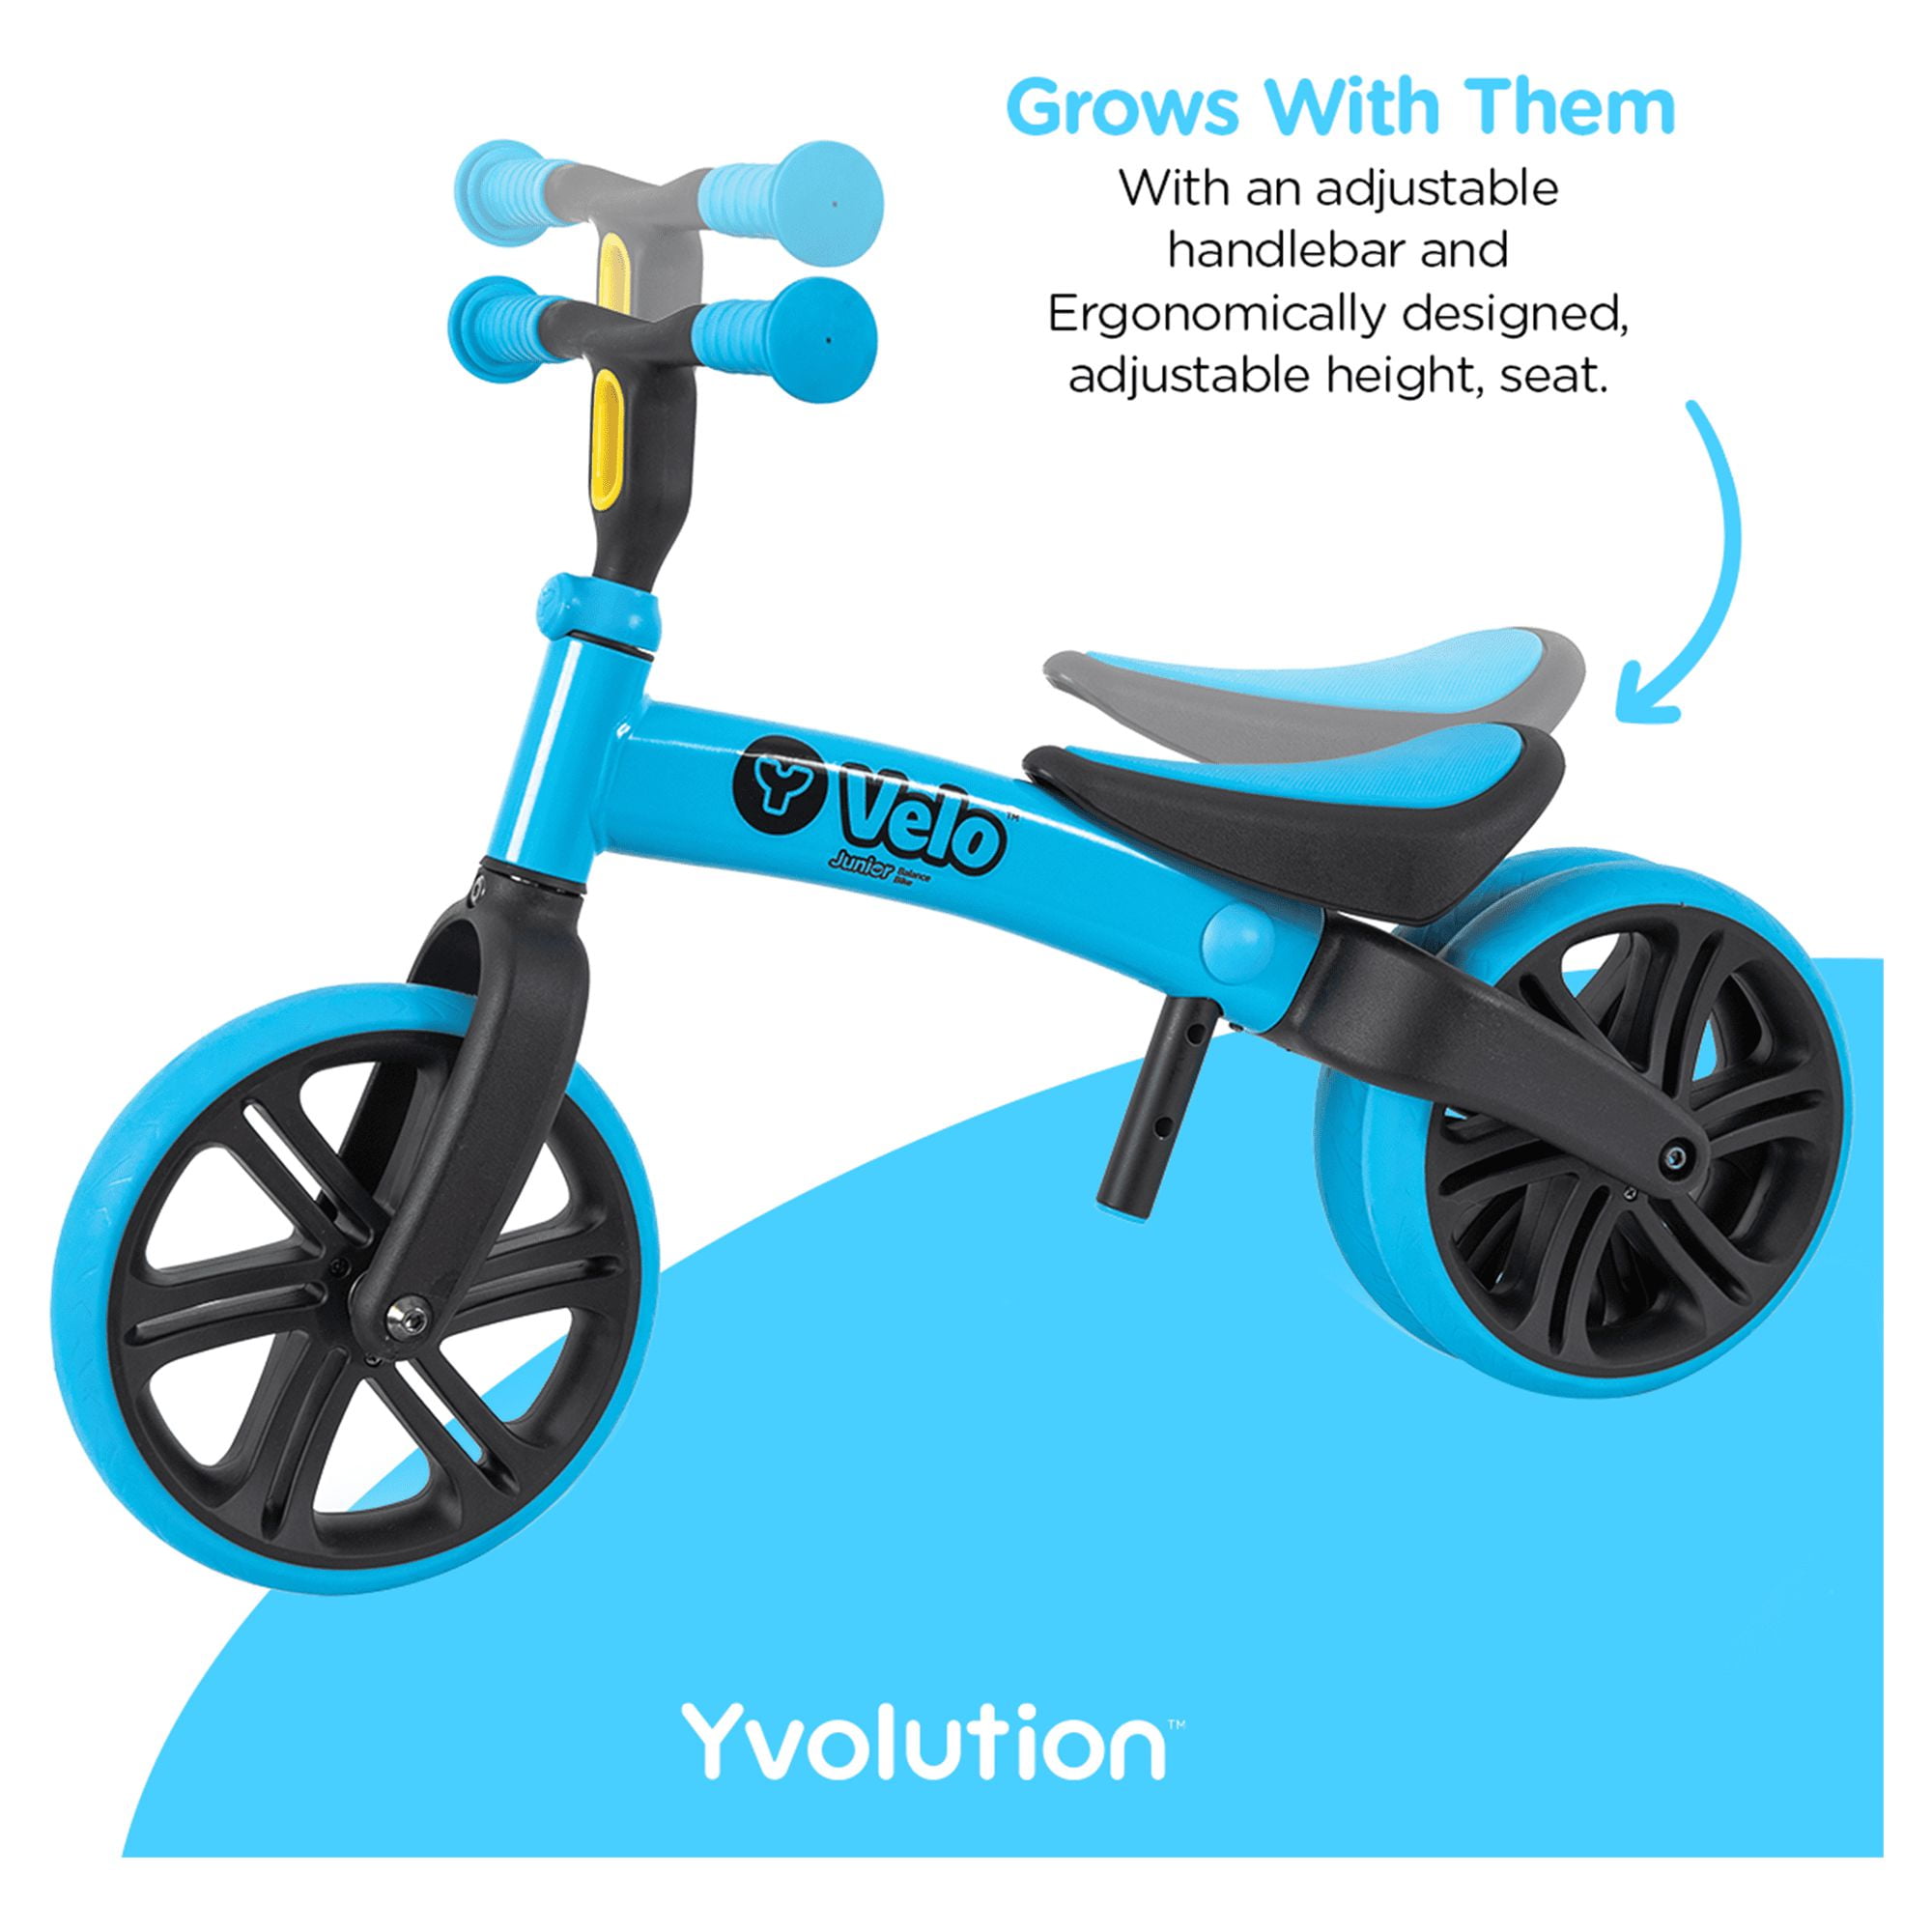 Yvolution Velo Toddler and 9\'\' Years Old Months Boys (Blue) Wheel Balance to 3 Bike Girls, 18